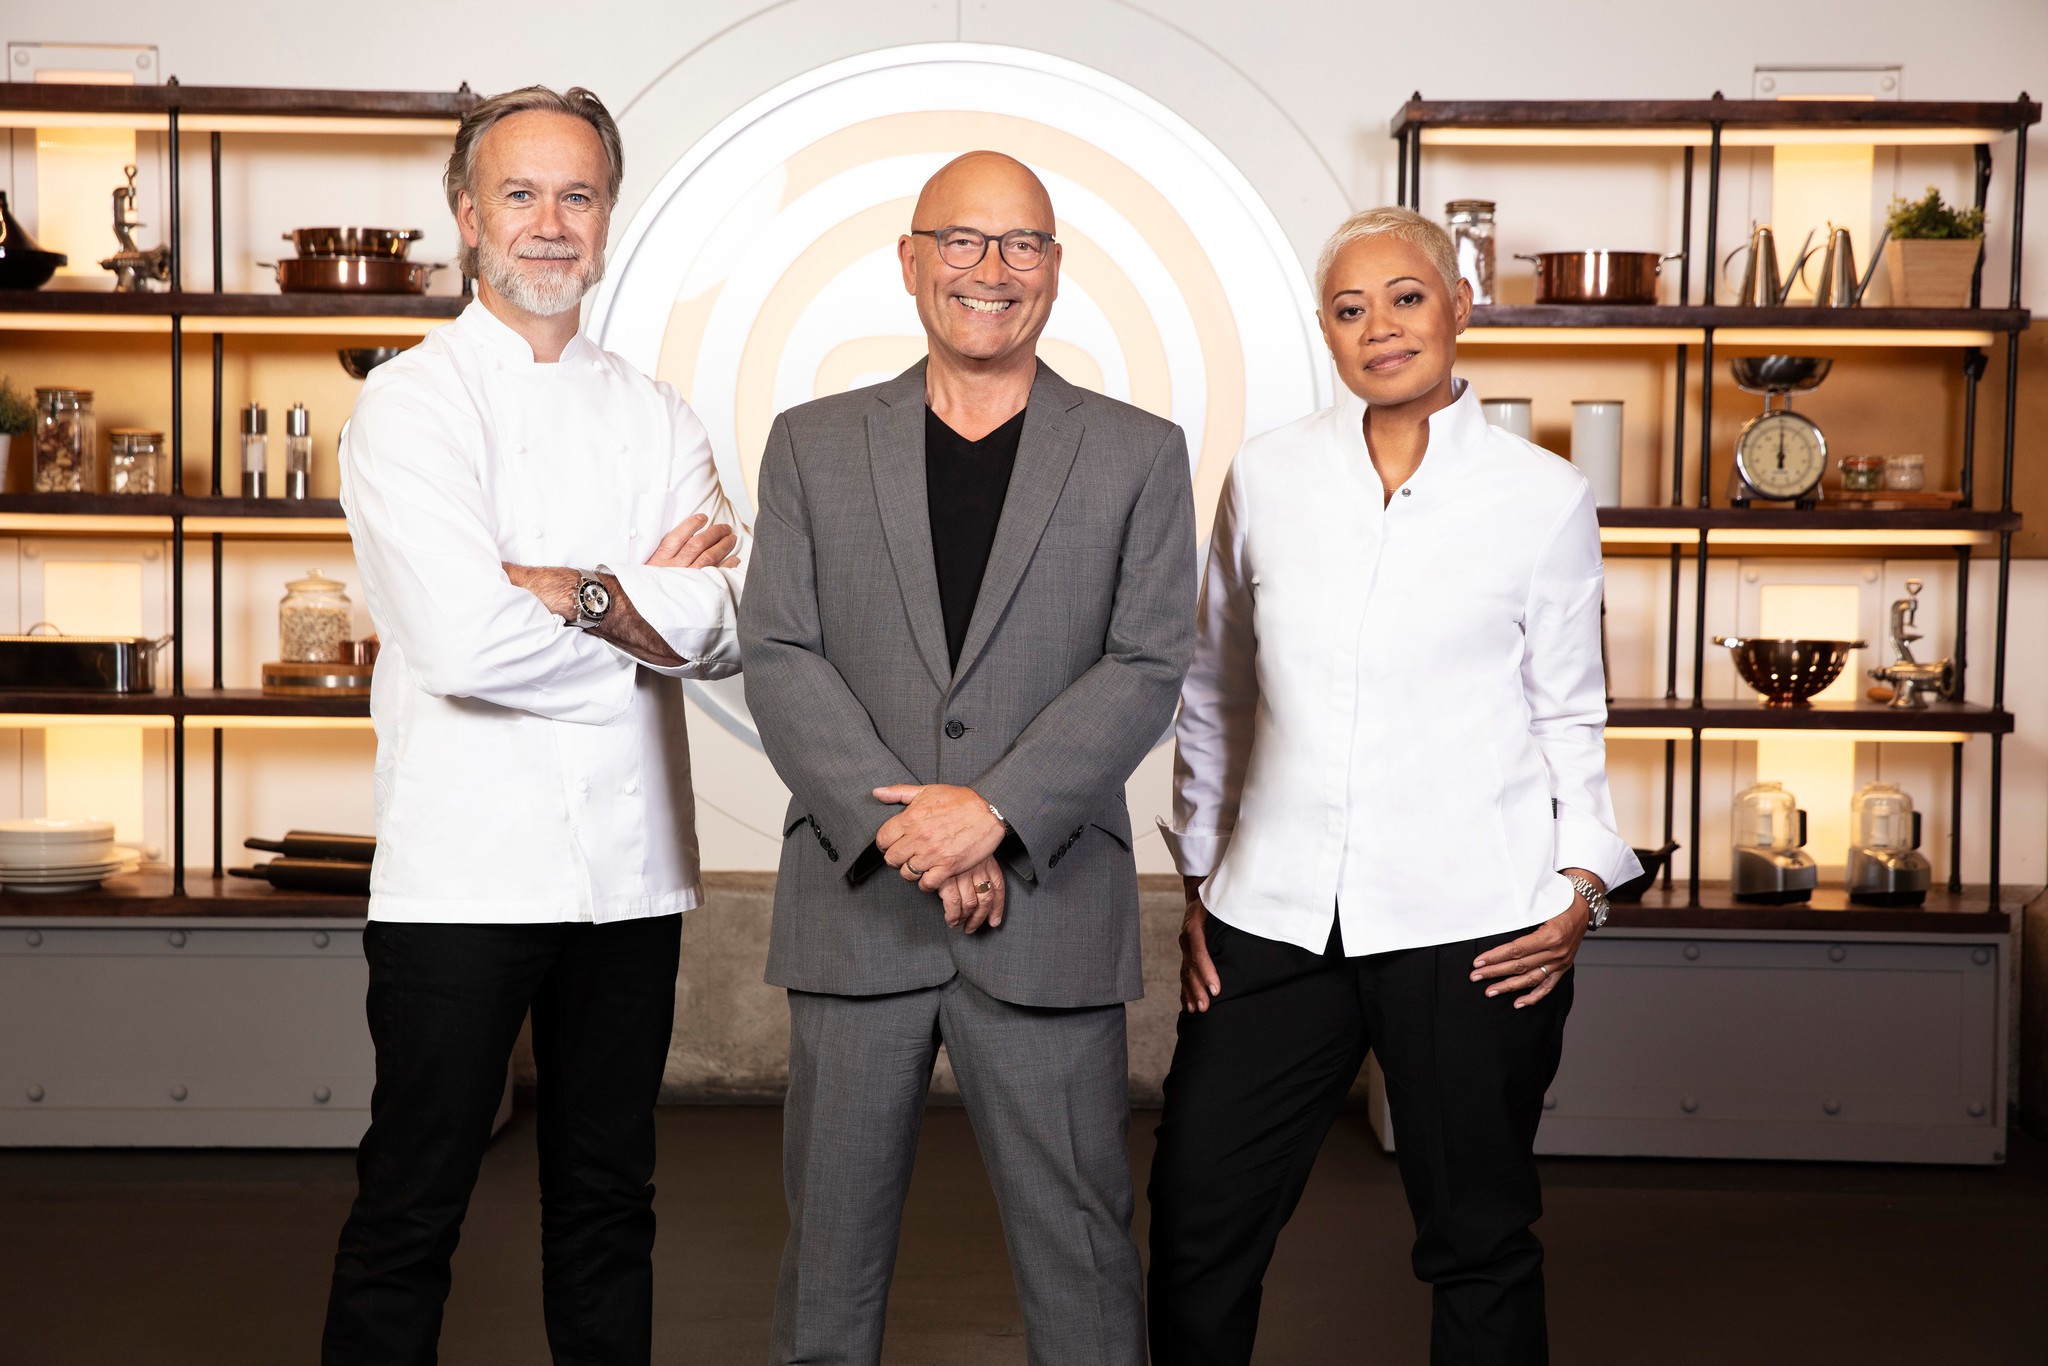 Marcus Wareing, Gregg Wallace and Monica Galetti posing on the set of MasterChef:The Professionals 